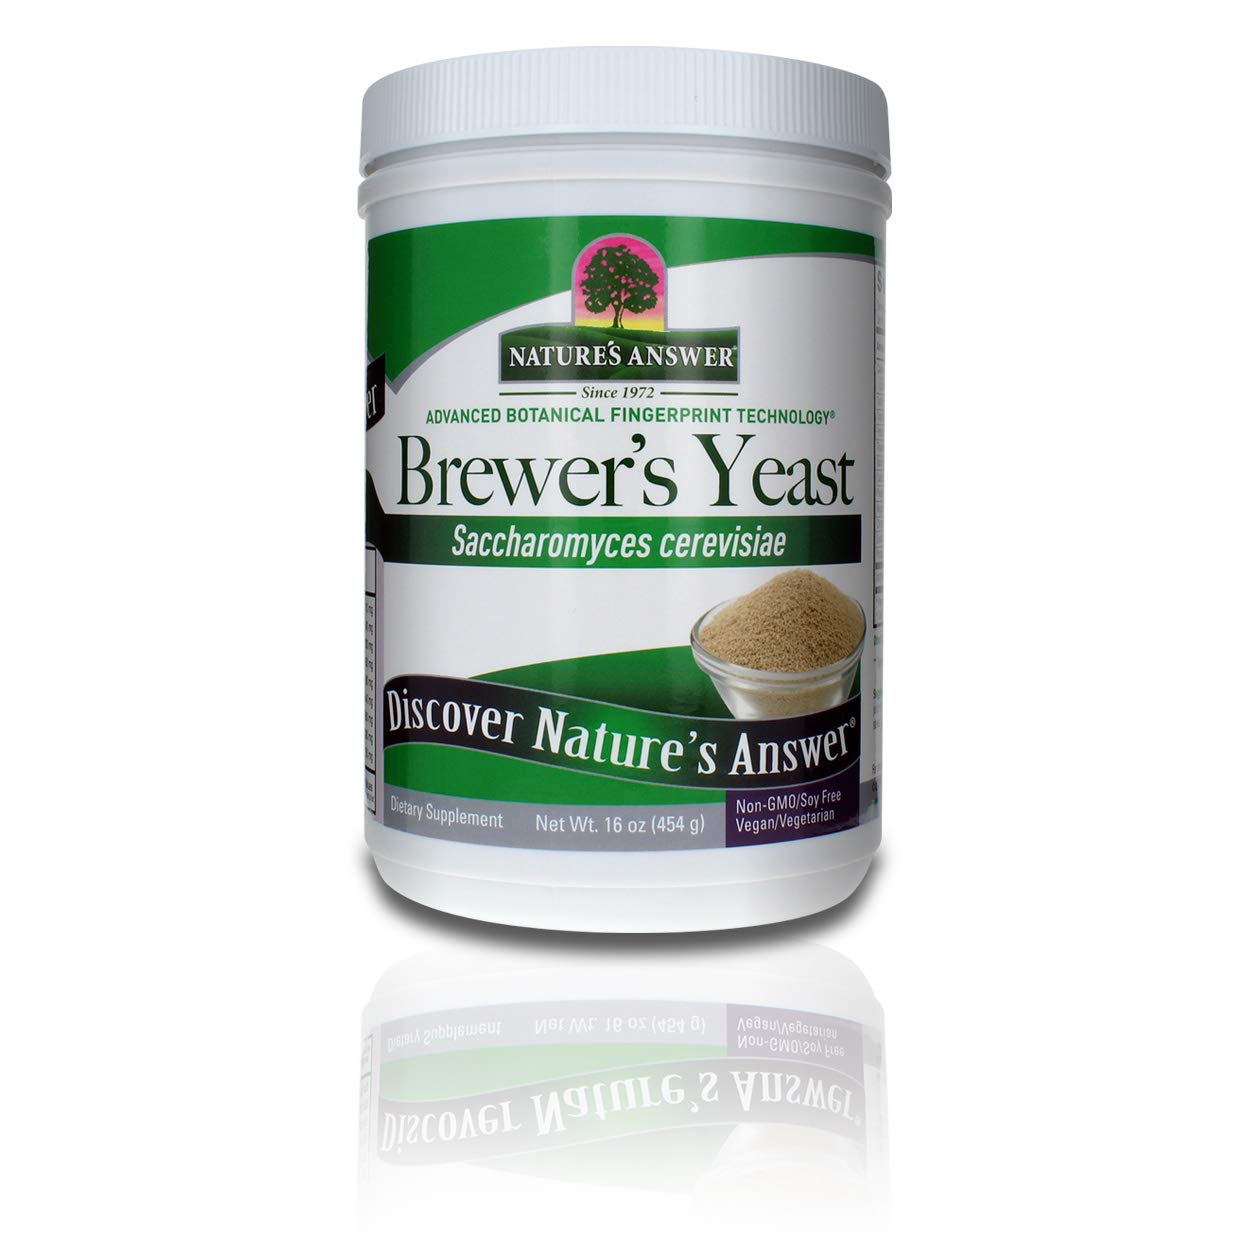 Nature's Answer Brewer's Yeast Powder, Rich Source of Amino Acids, B-Complex Vitamins, Minerals, & Protein - Natural, Unflavored, and Unswe...